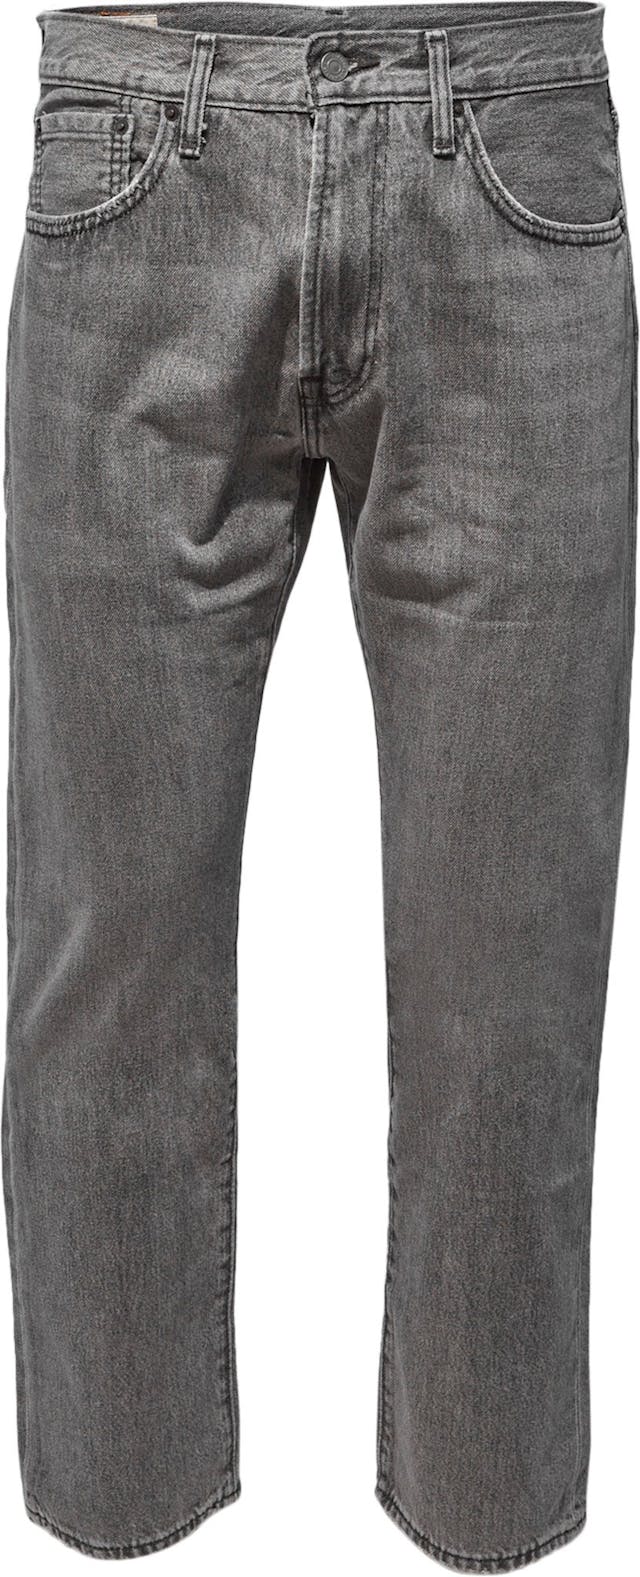 Product image for 551Z Authentic Straight Fit Jeans - Men's